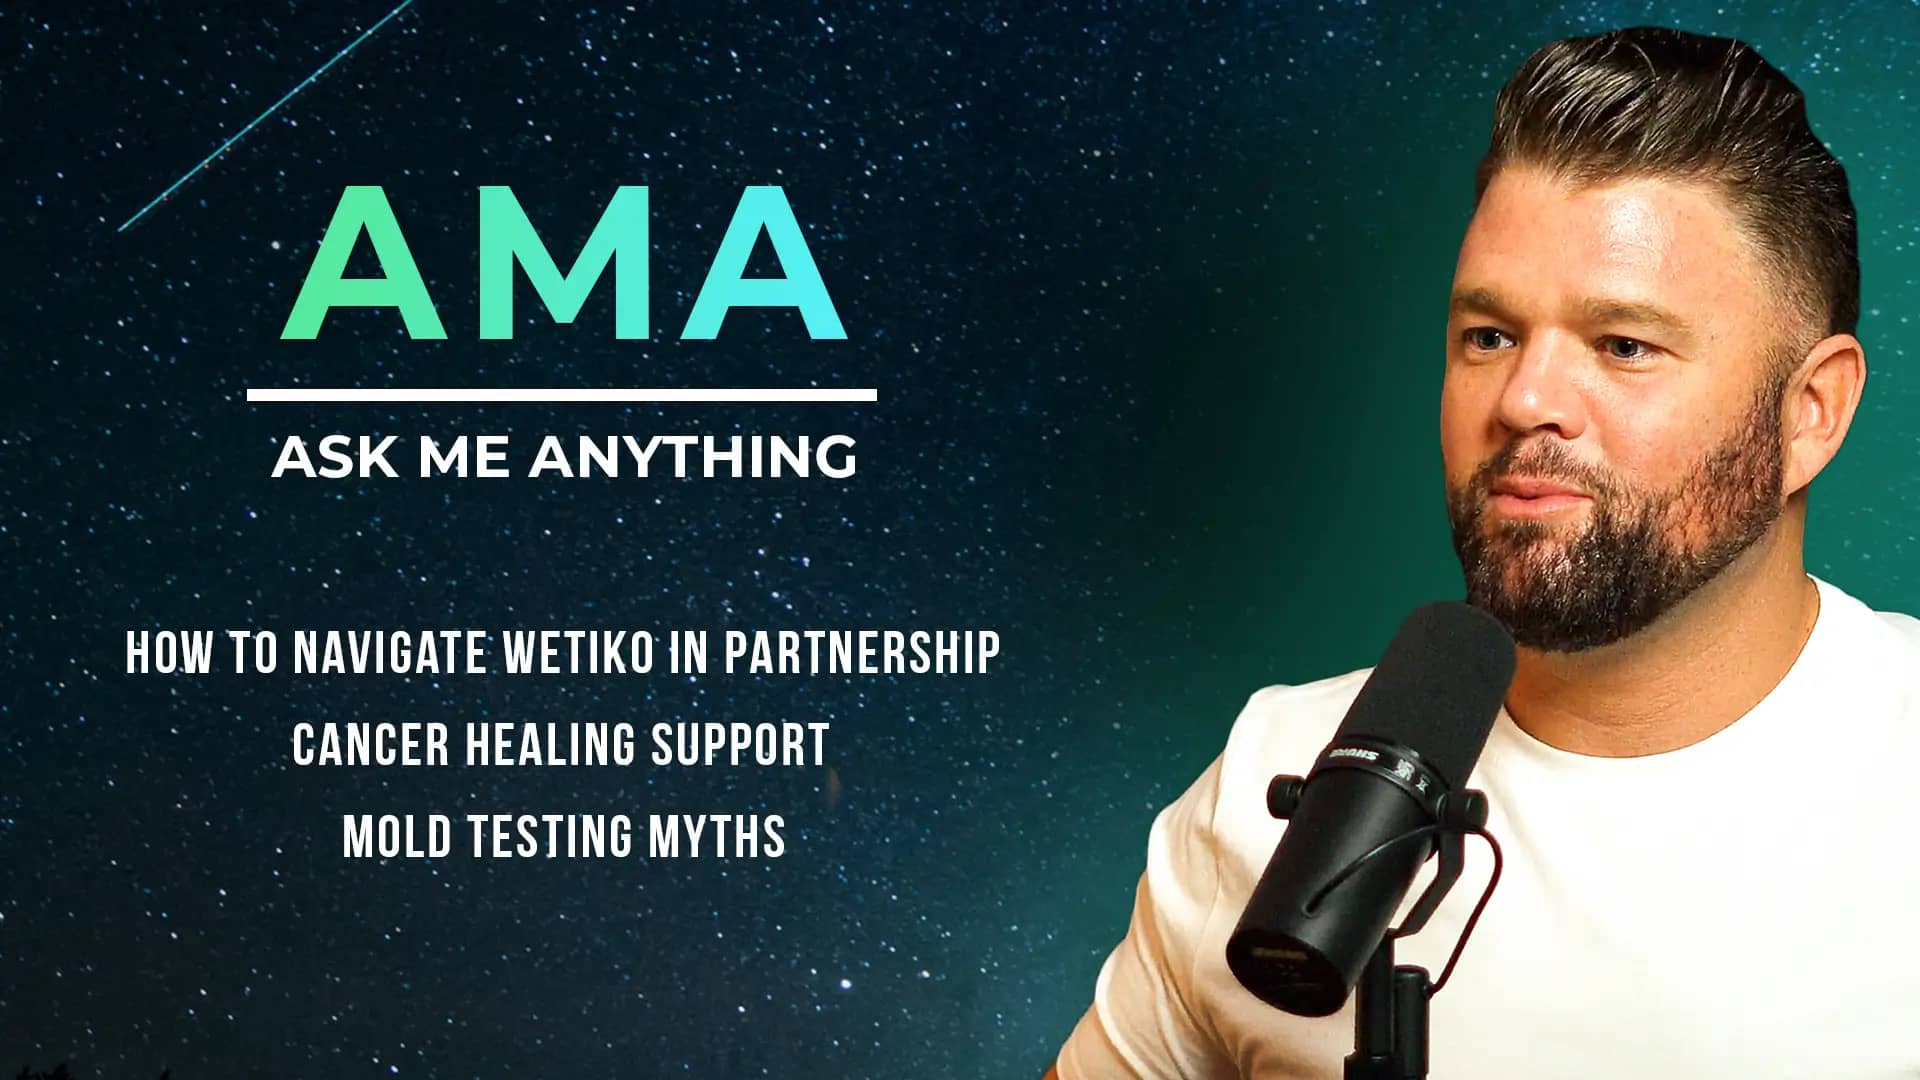 AMA: How To Navigate Wetiko In Partnership, Cancer Healing Support + Mold Testing Myths